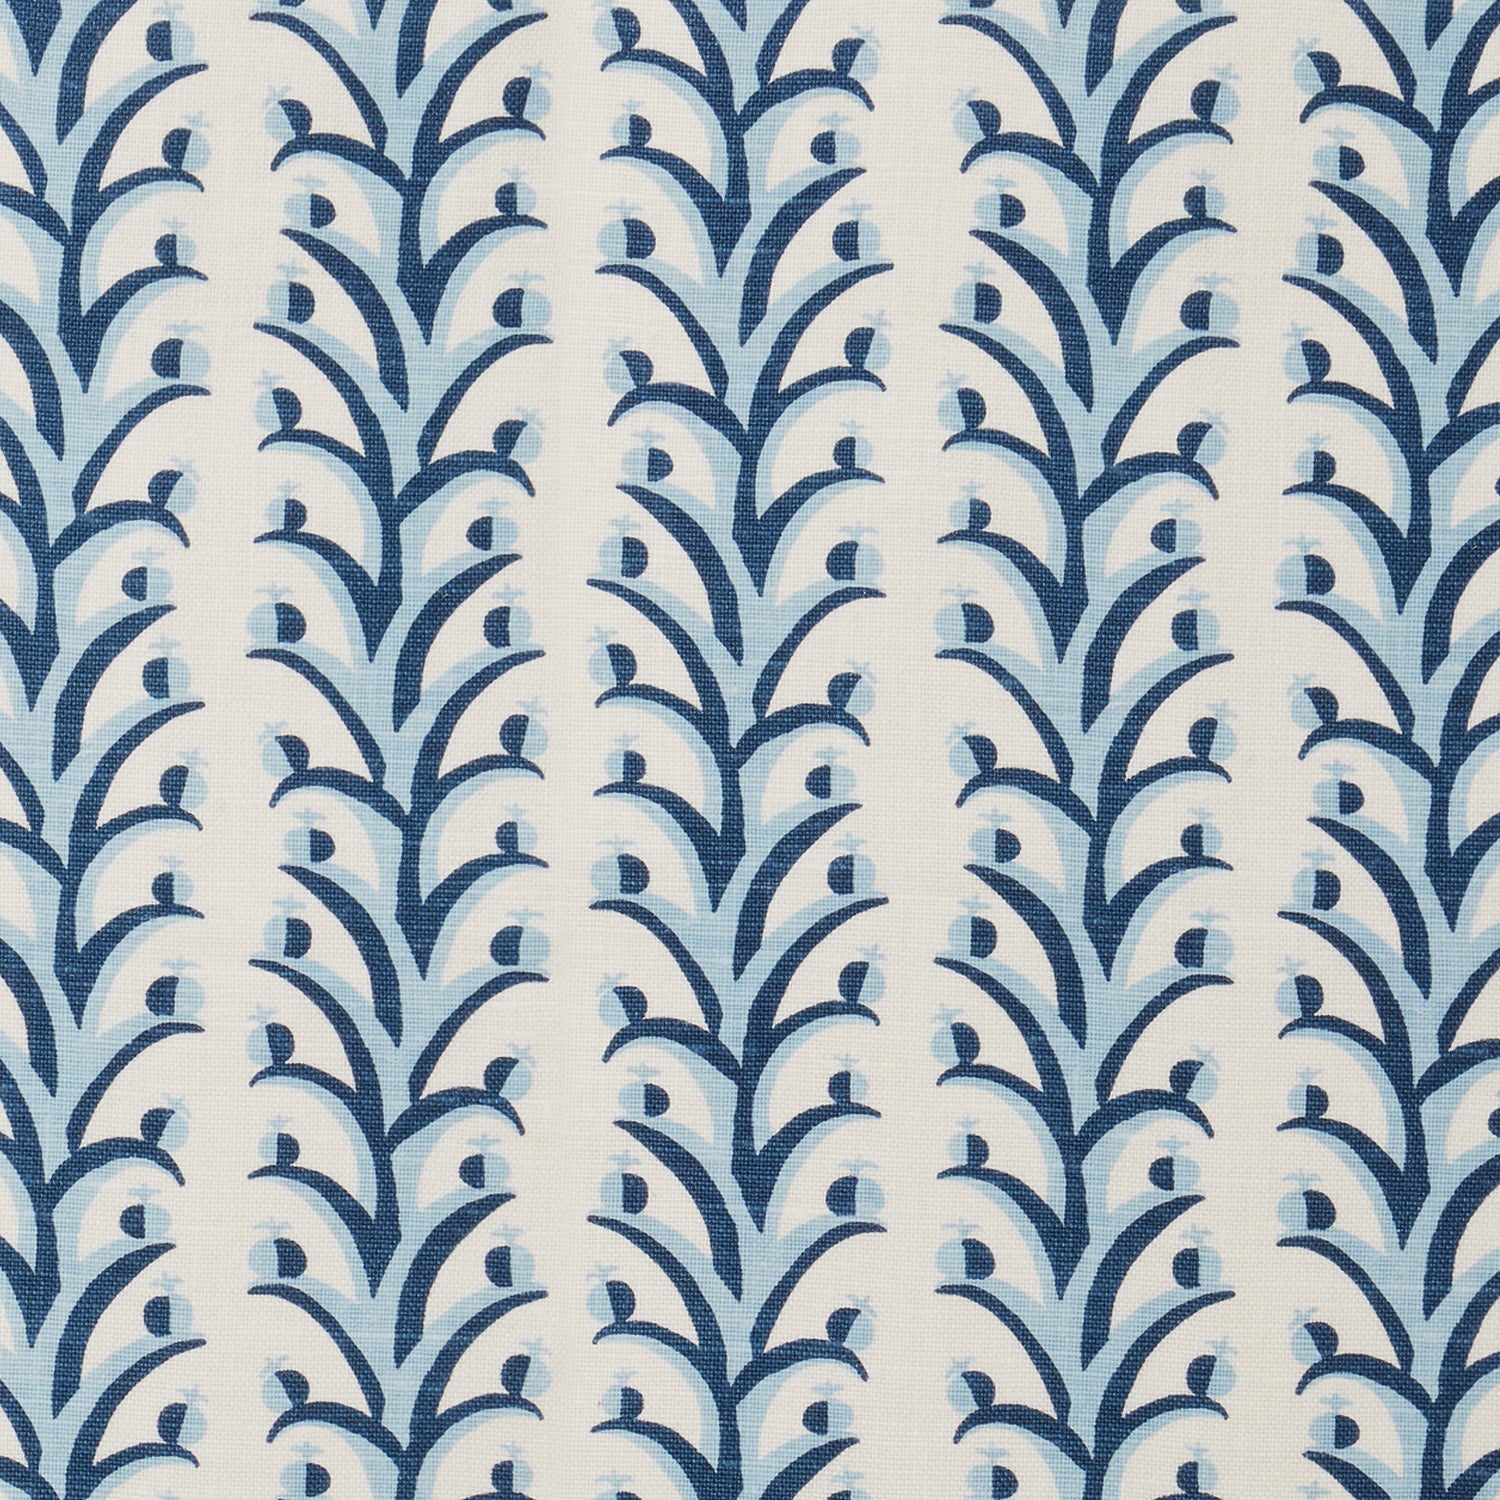 Fabric swatch with a horizontal striped pattern of curved branches topped with tiny fruits, in shades of cream, blue and navy.